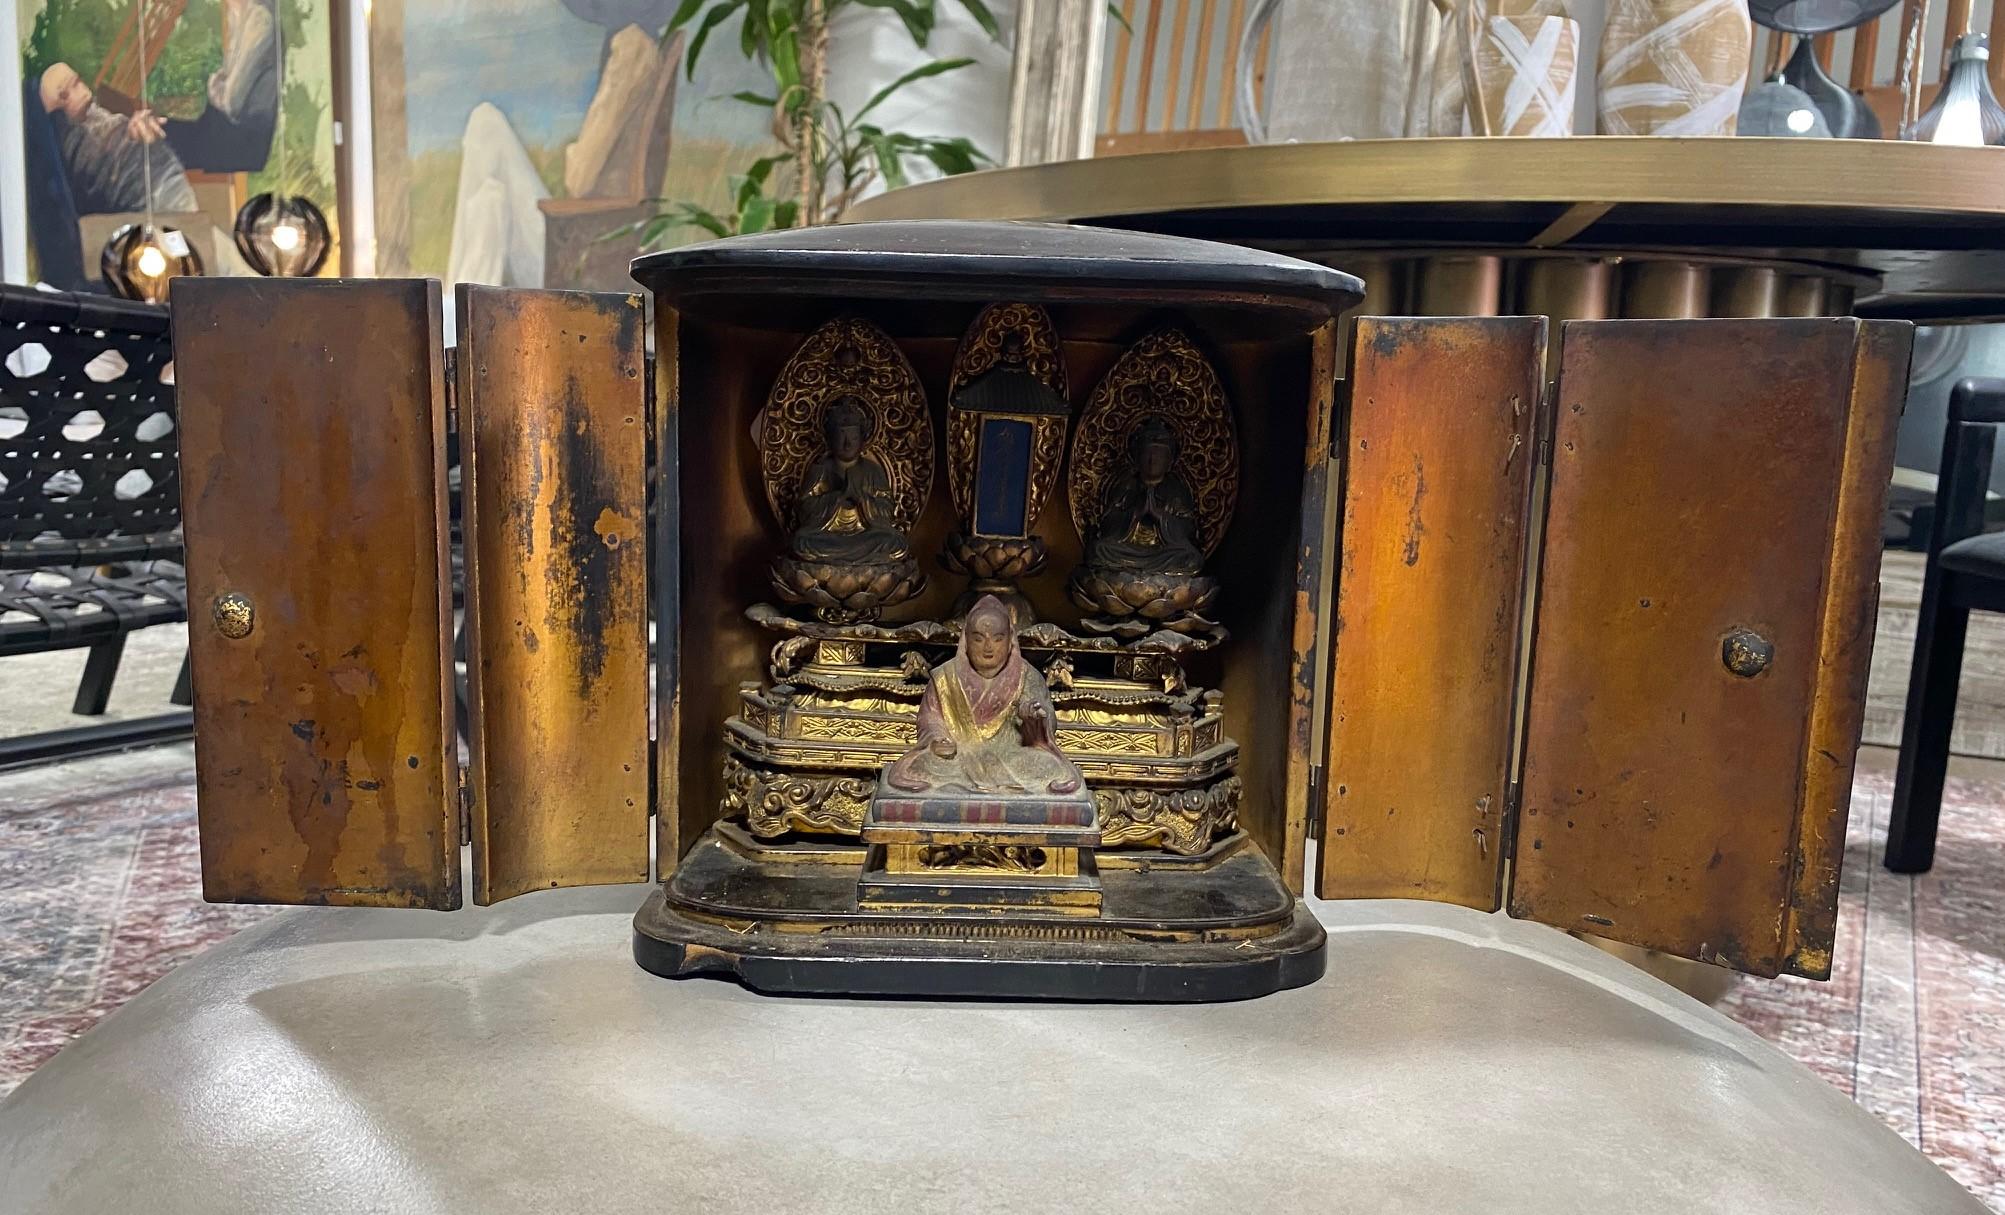 A gorgeously designed and ornamented, well-crafted Japanese Nichiren Shu Buddhist traveling Zushi Buddha shrine. Per our Japanese friend, to the left is Shaka Nyorai (Shakamunibutsu) and on the right, is Taho Nyorai. In the middle is the Treasure